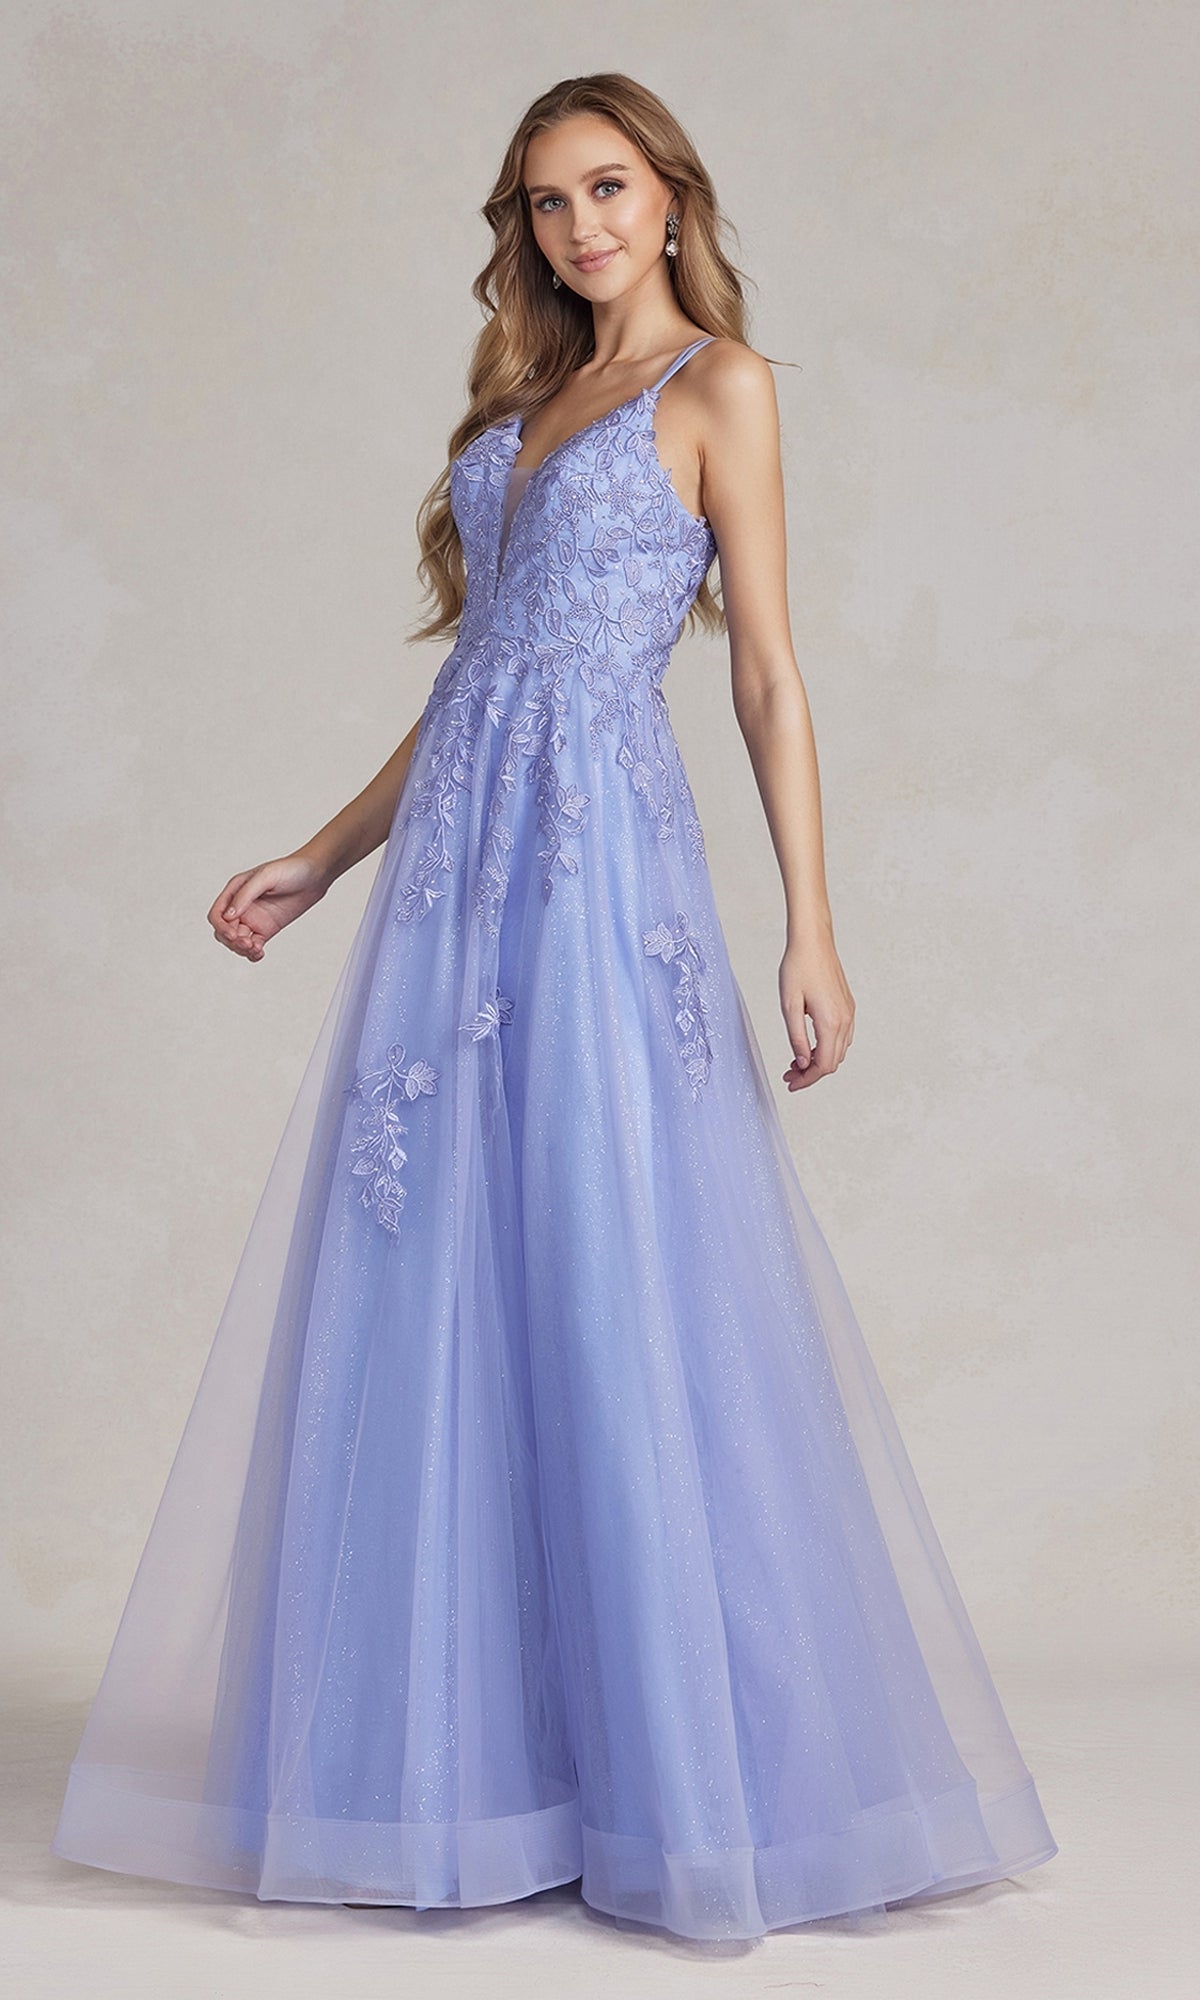  Embroidered-Lace Long Prom Ball Gown with Corset